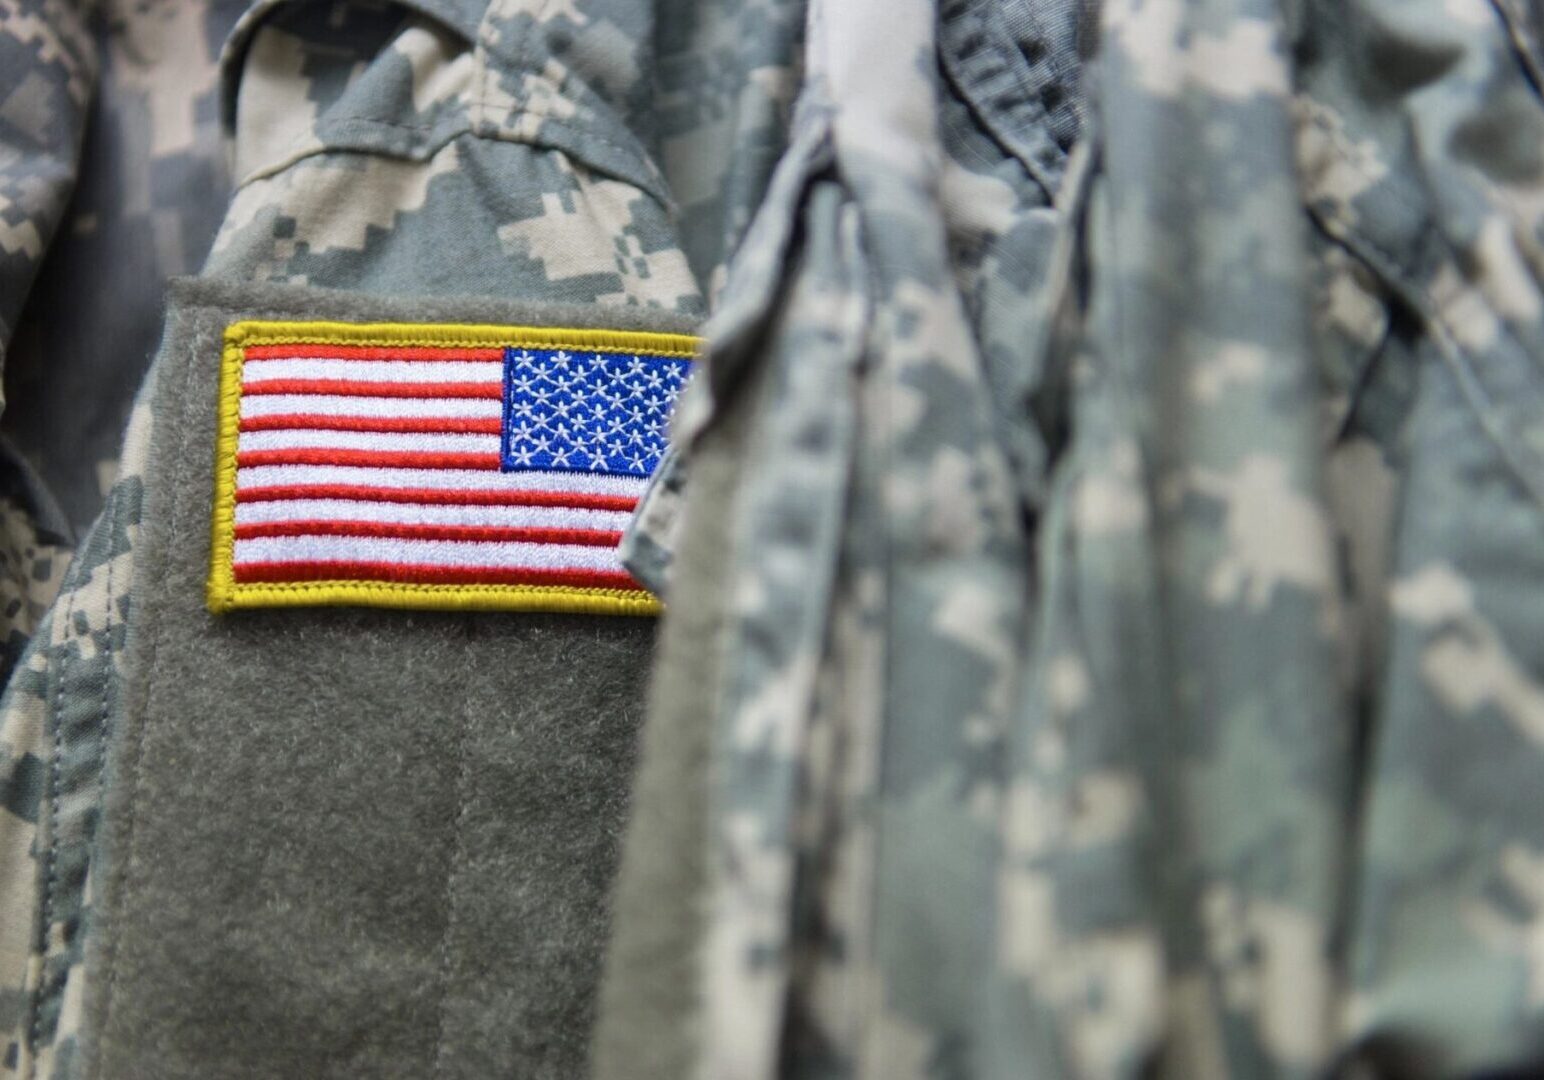 A close up of the american flag patch on a uniform.